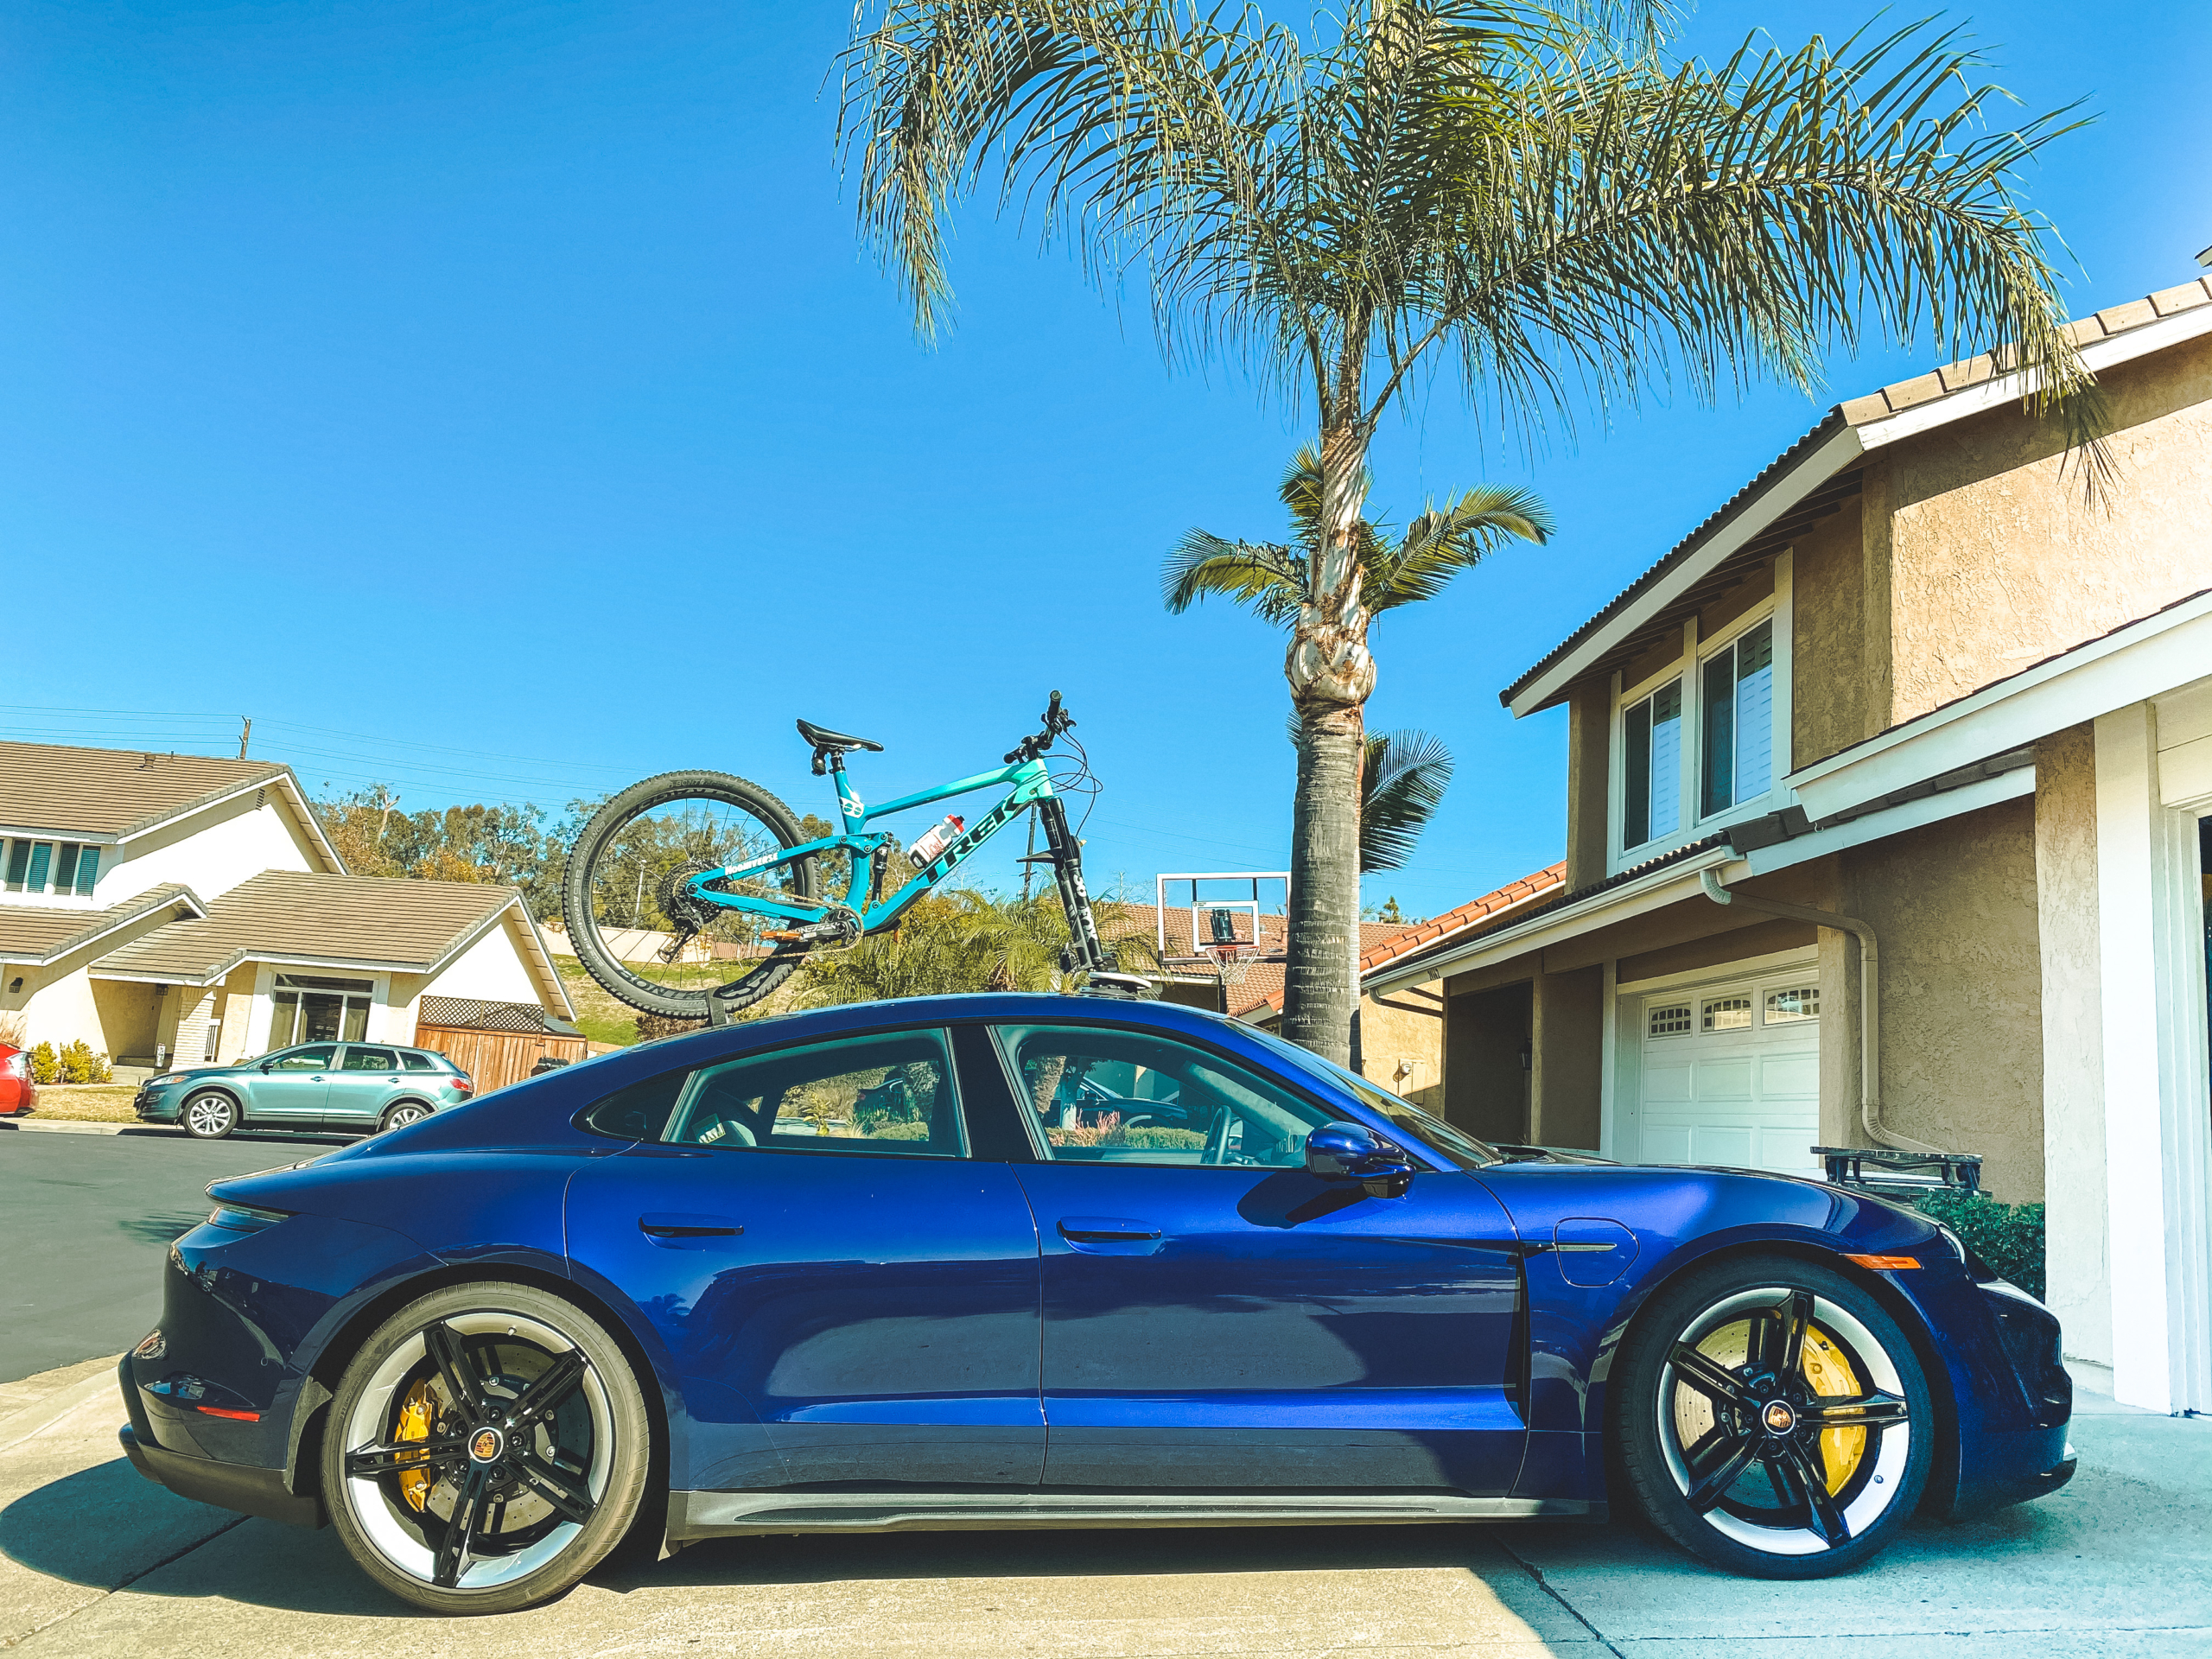 Porsche Taycan Turbo S with mountain bike on the roof